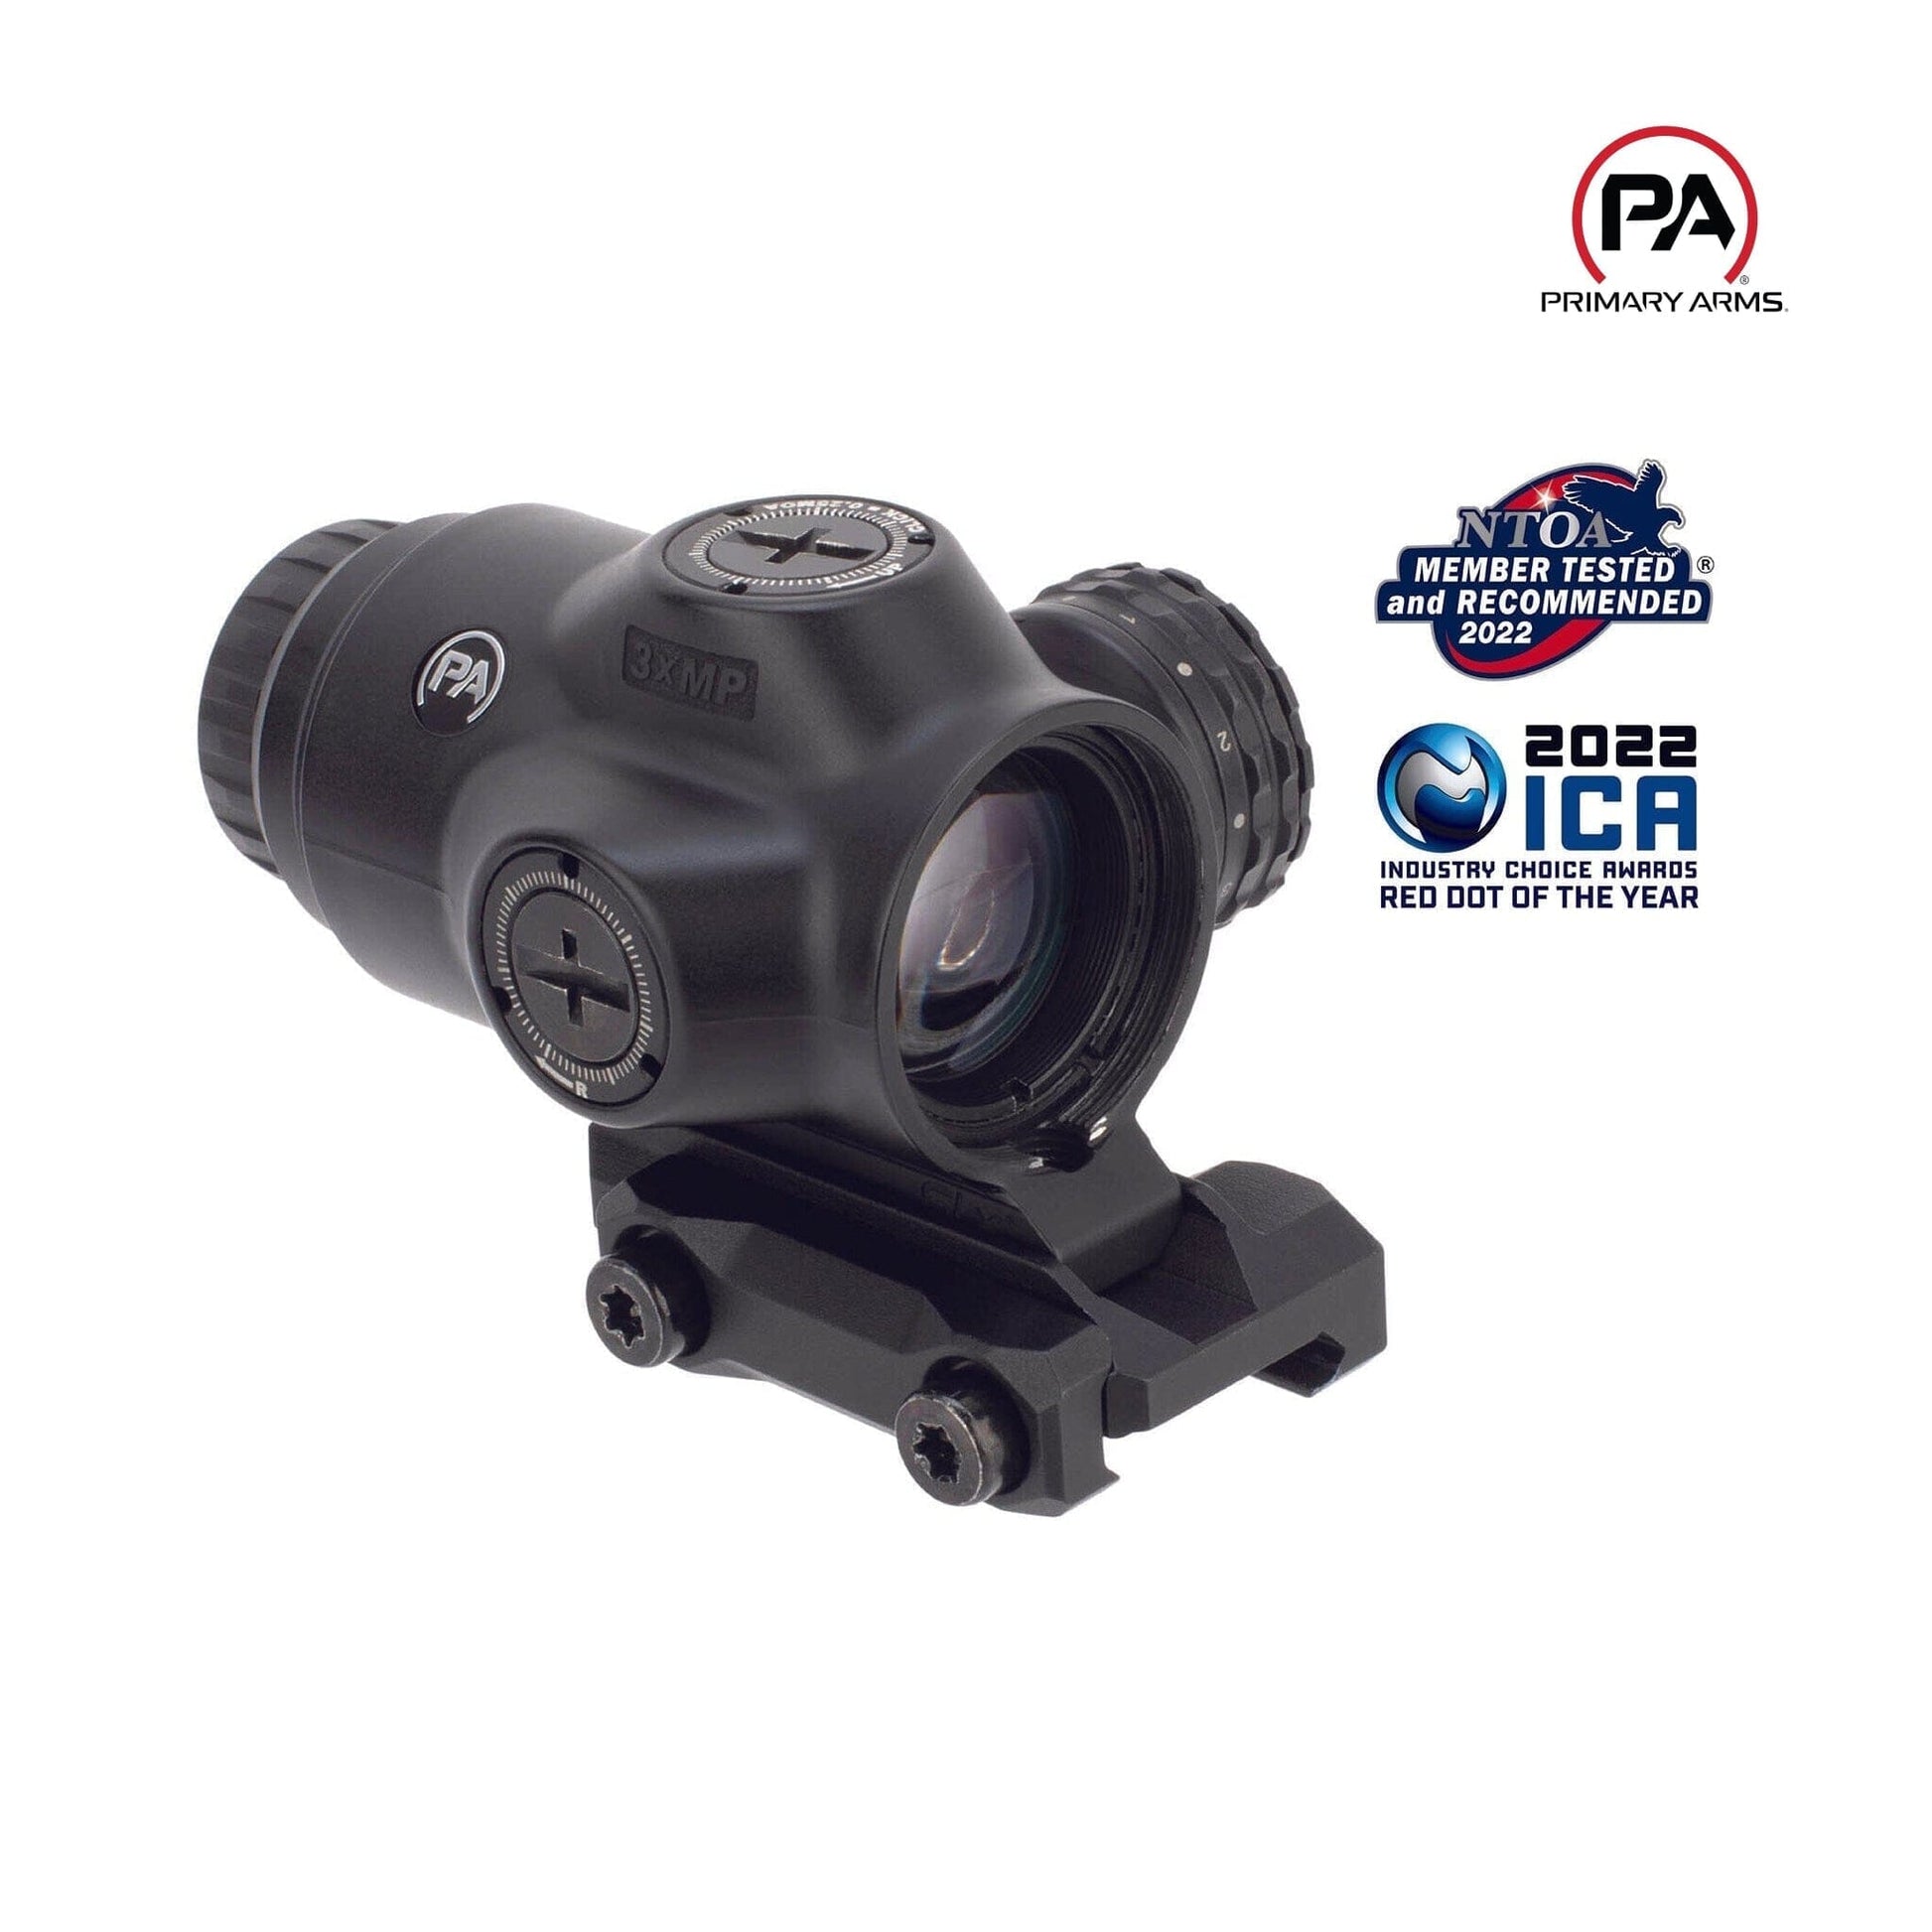 Primary Arms SLx 3x MicroPrism Sight - Red ACSS Raptor 7.62x39/.300 BLK - Yard Reticle Prism Rifle Scope Primary Arms 